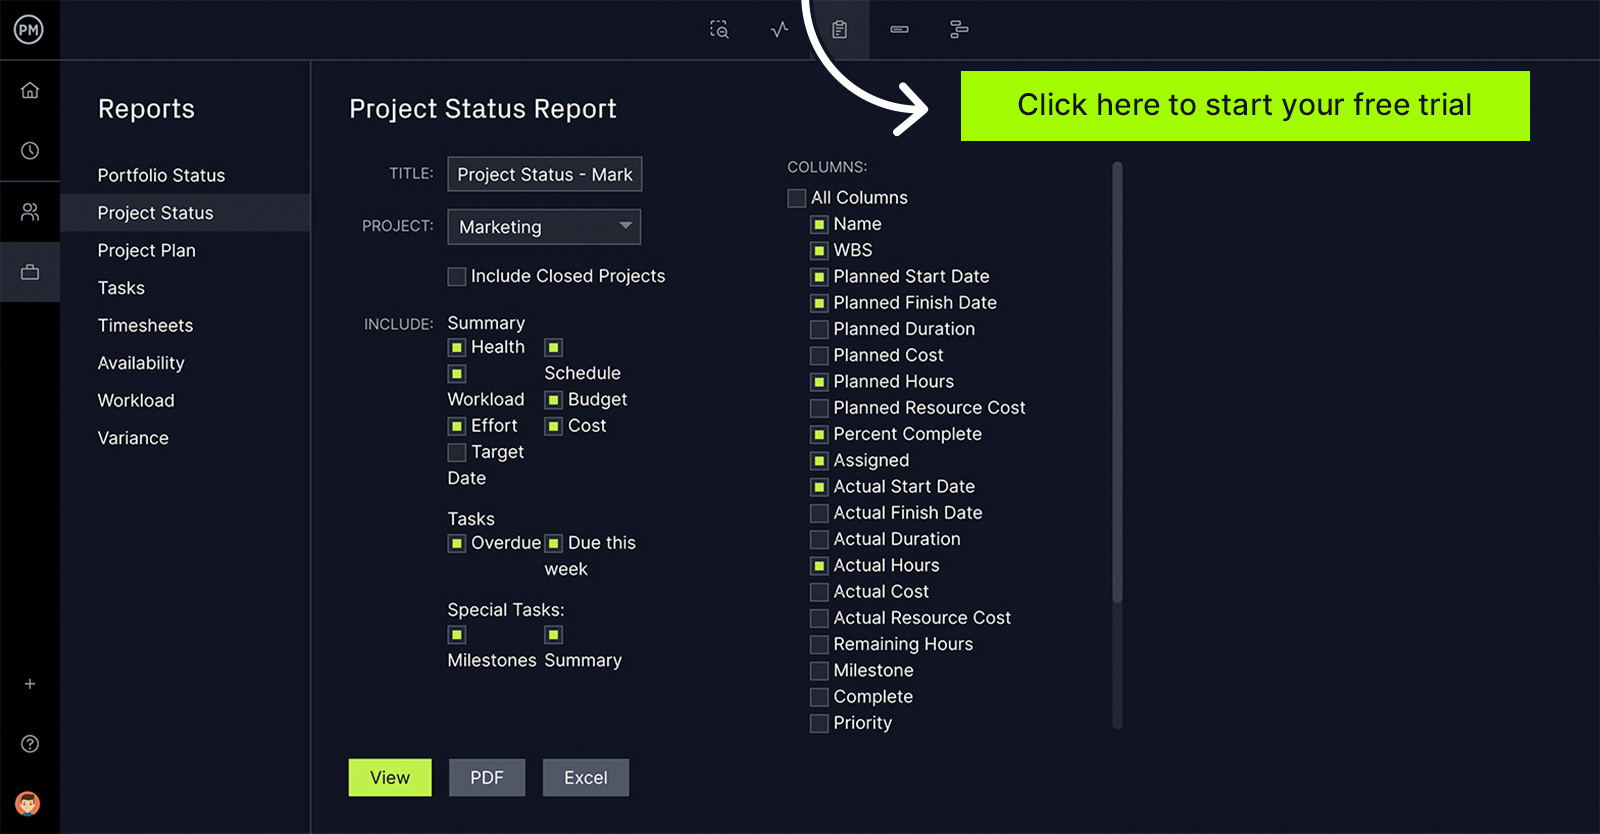 ProjectManager's status report filter, ideal for conducting a project audit